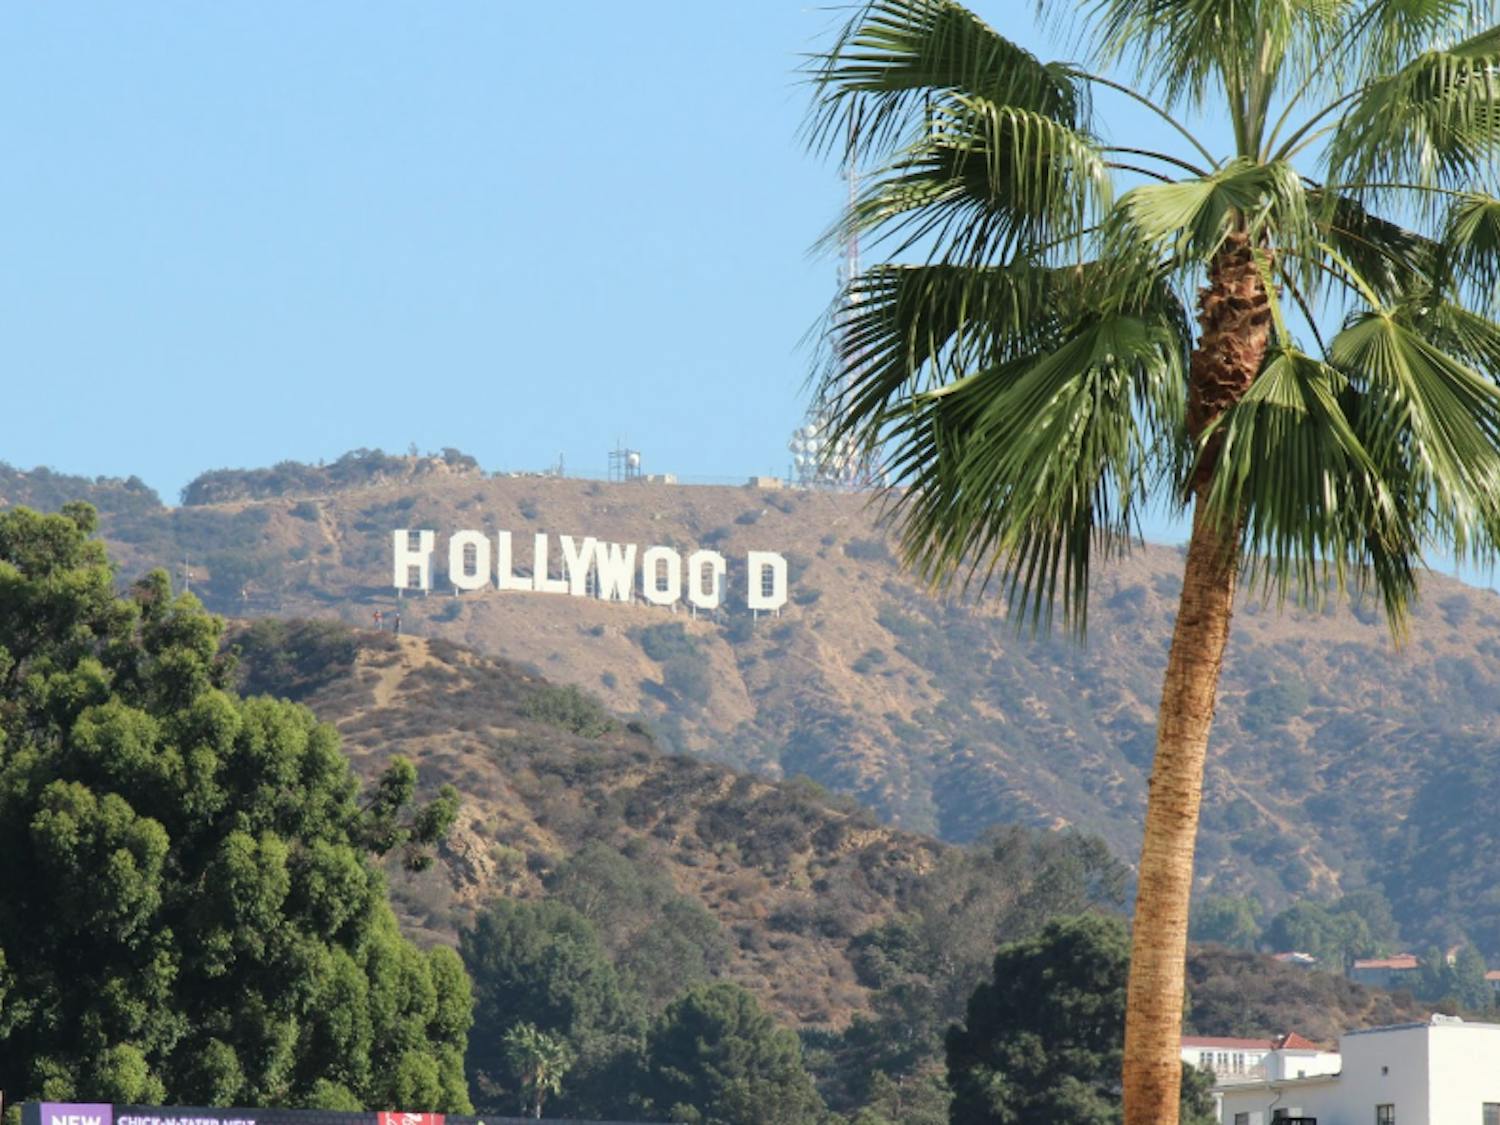 The birth of Hollywood happened to coincide with a period in time in which, unsurprisingly, Jews were being ousted from their professions for their religion (Photo courtesy of Flickr/ “Hollywood” by Shinya Suzuki. Oct. 6, 2014).